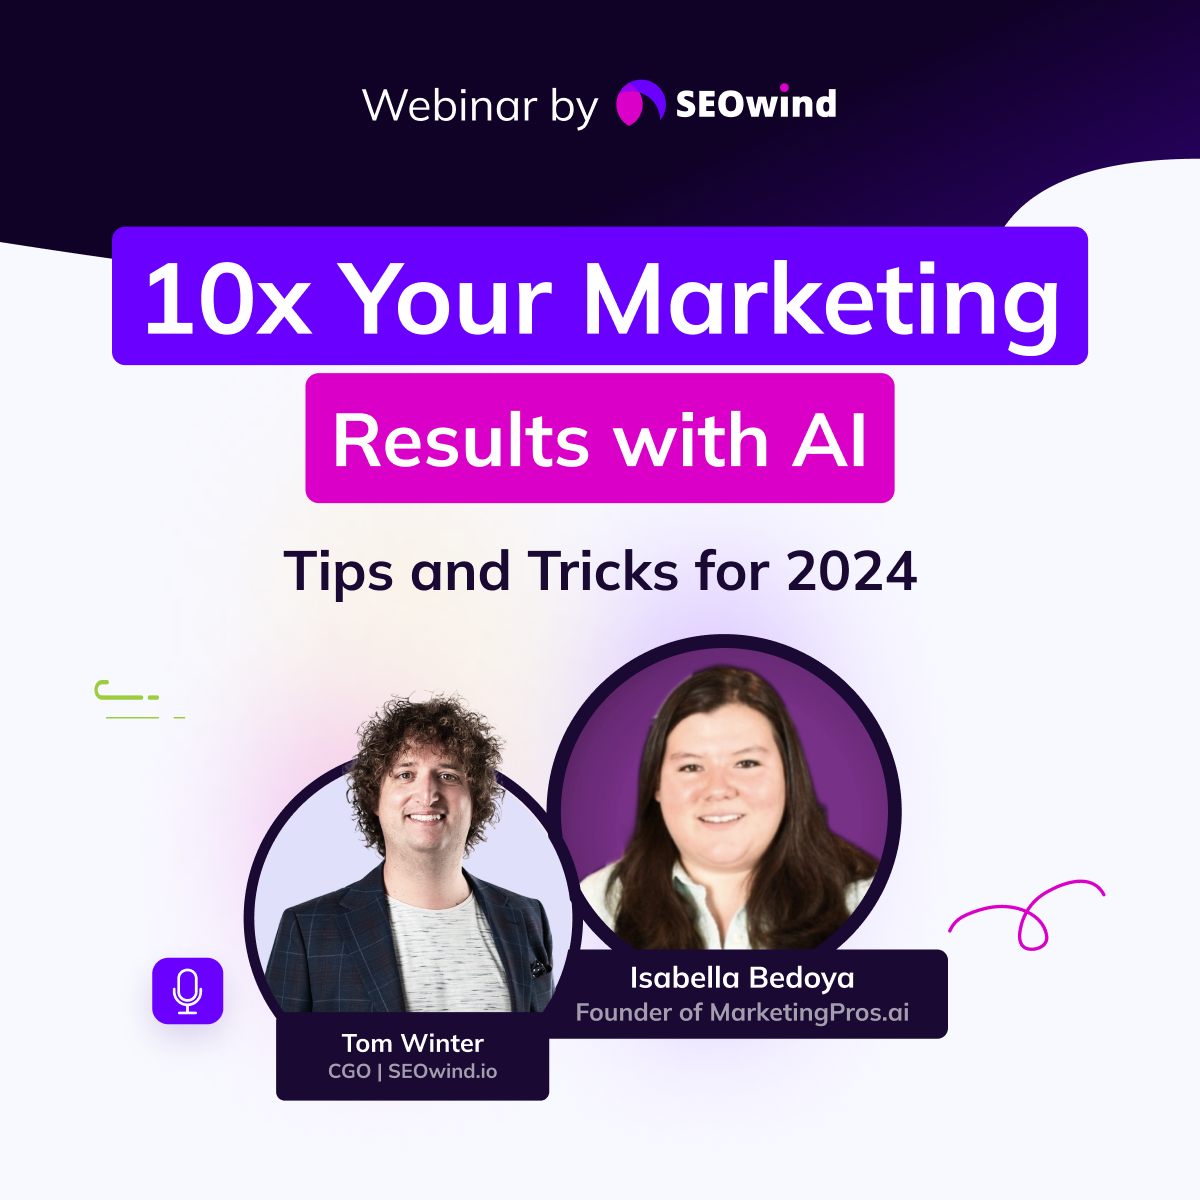 10x Your Marketing Results with AI. Tips and Tricks for 2024. with Isabella Bedoya